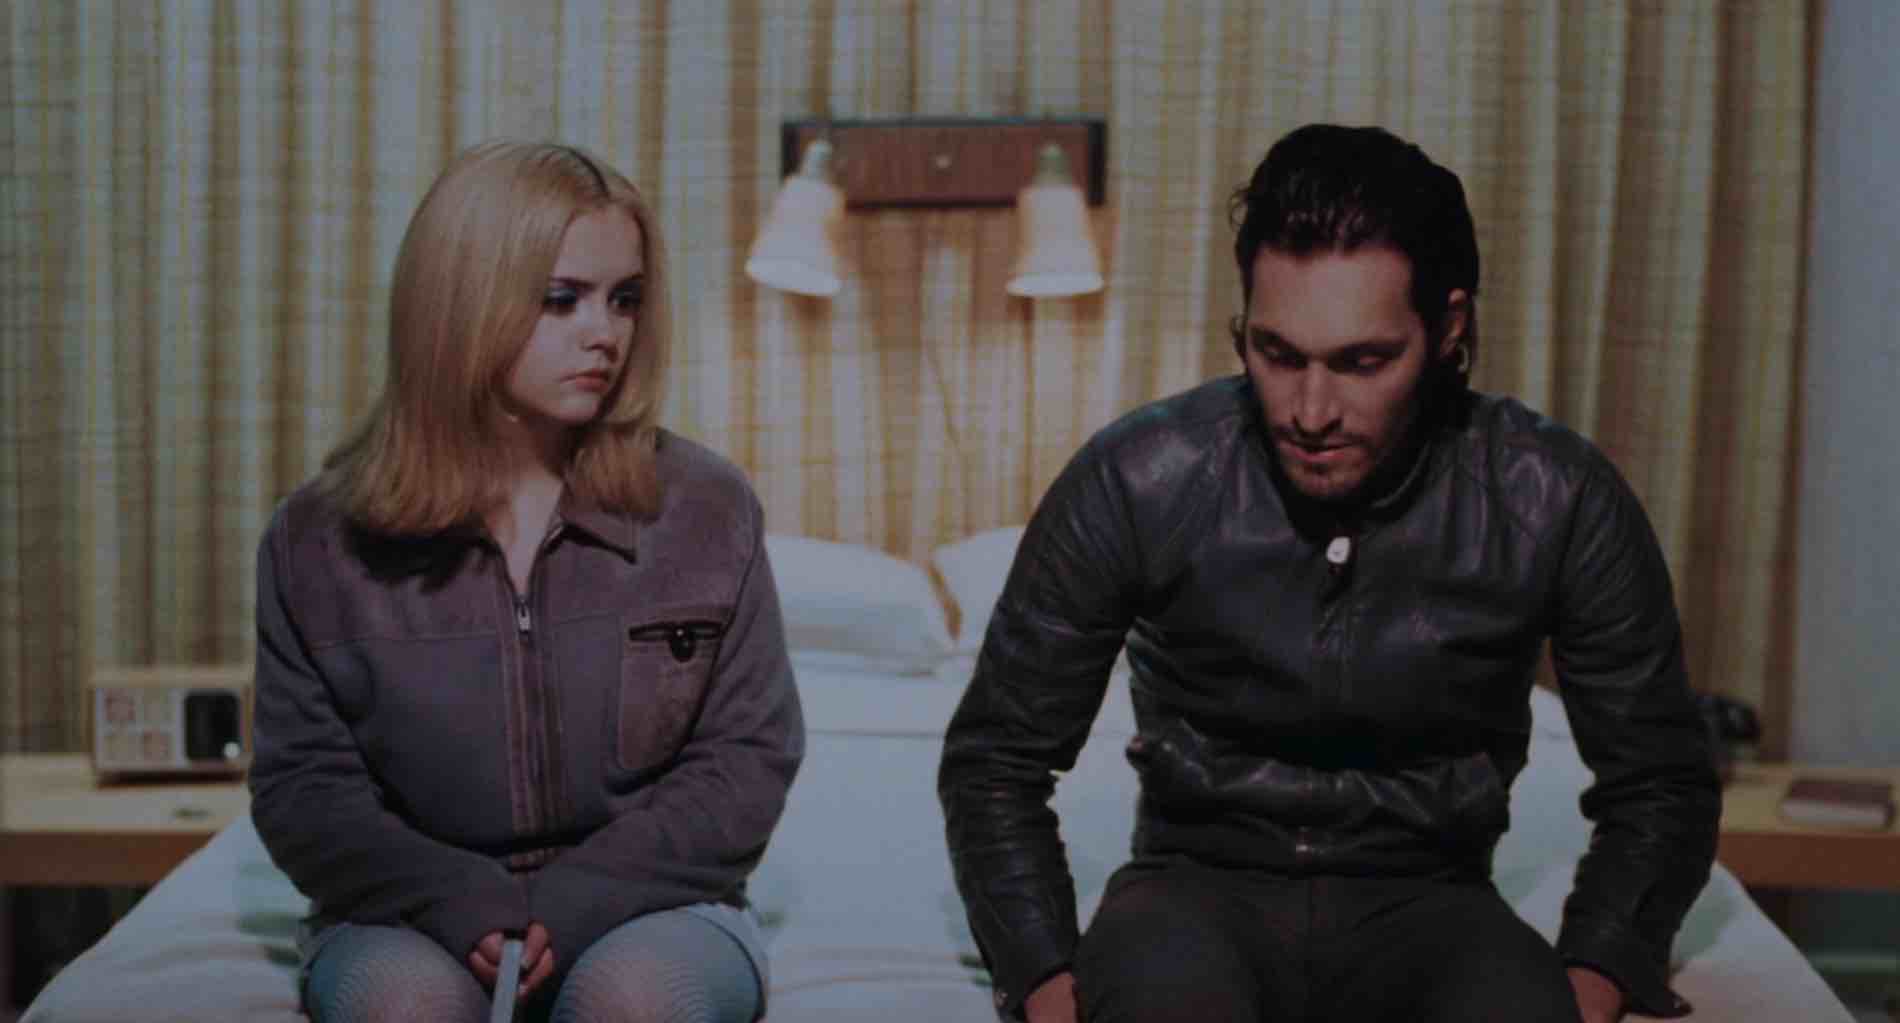 Buffalo'66 (1998) by Vincent Gallo